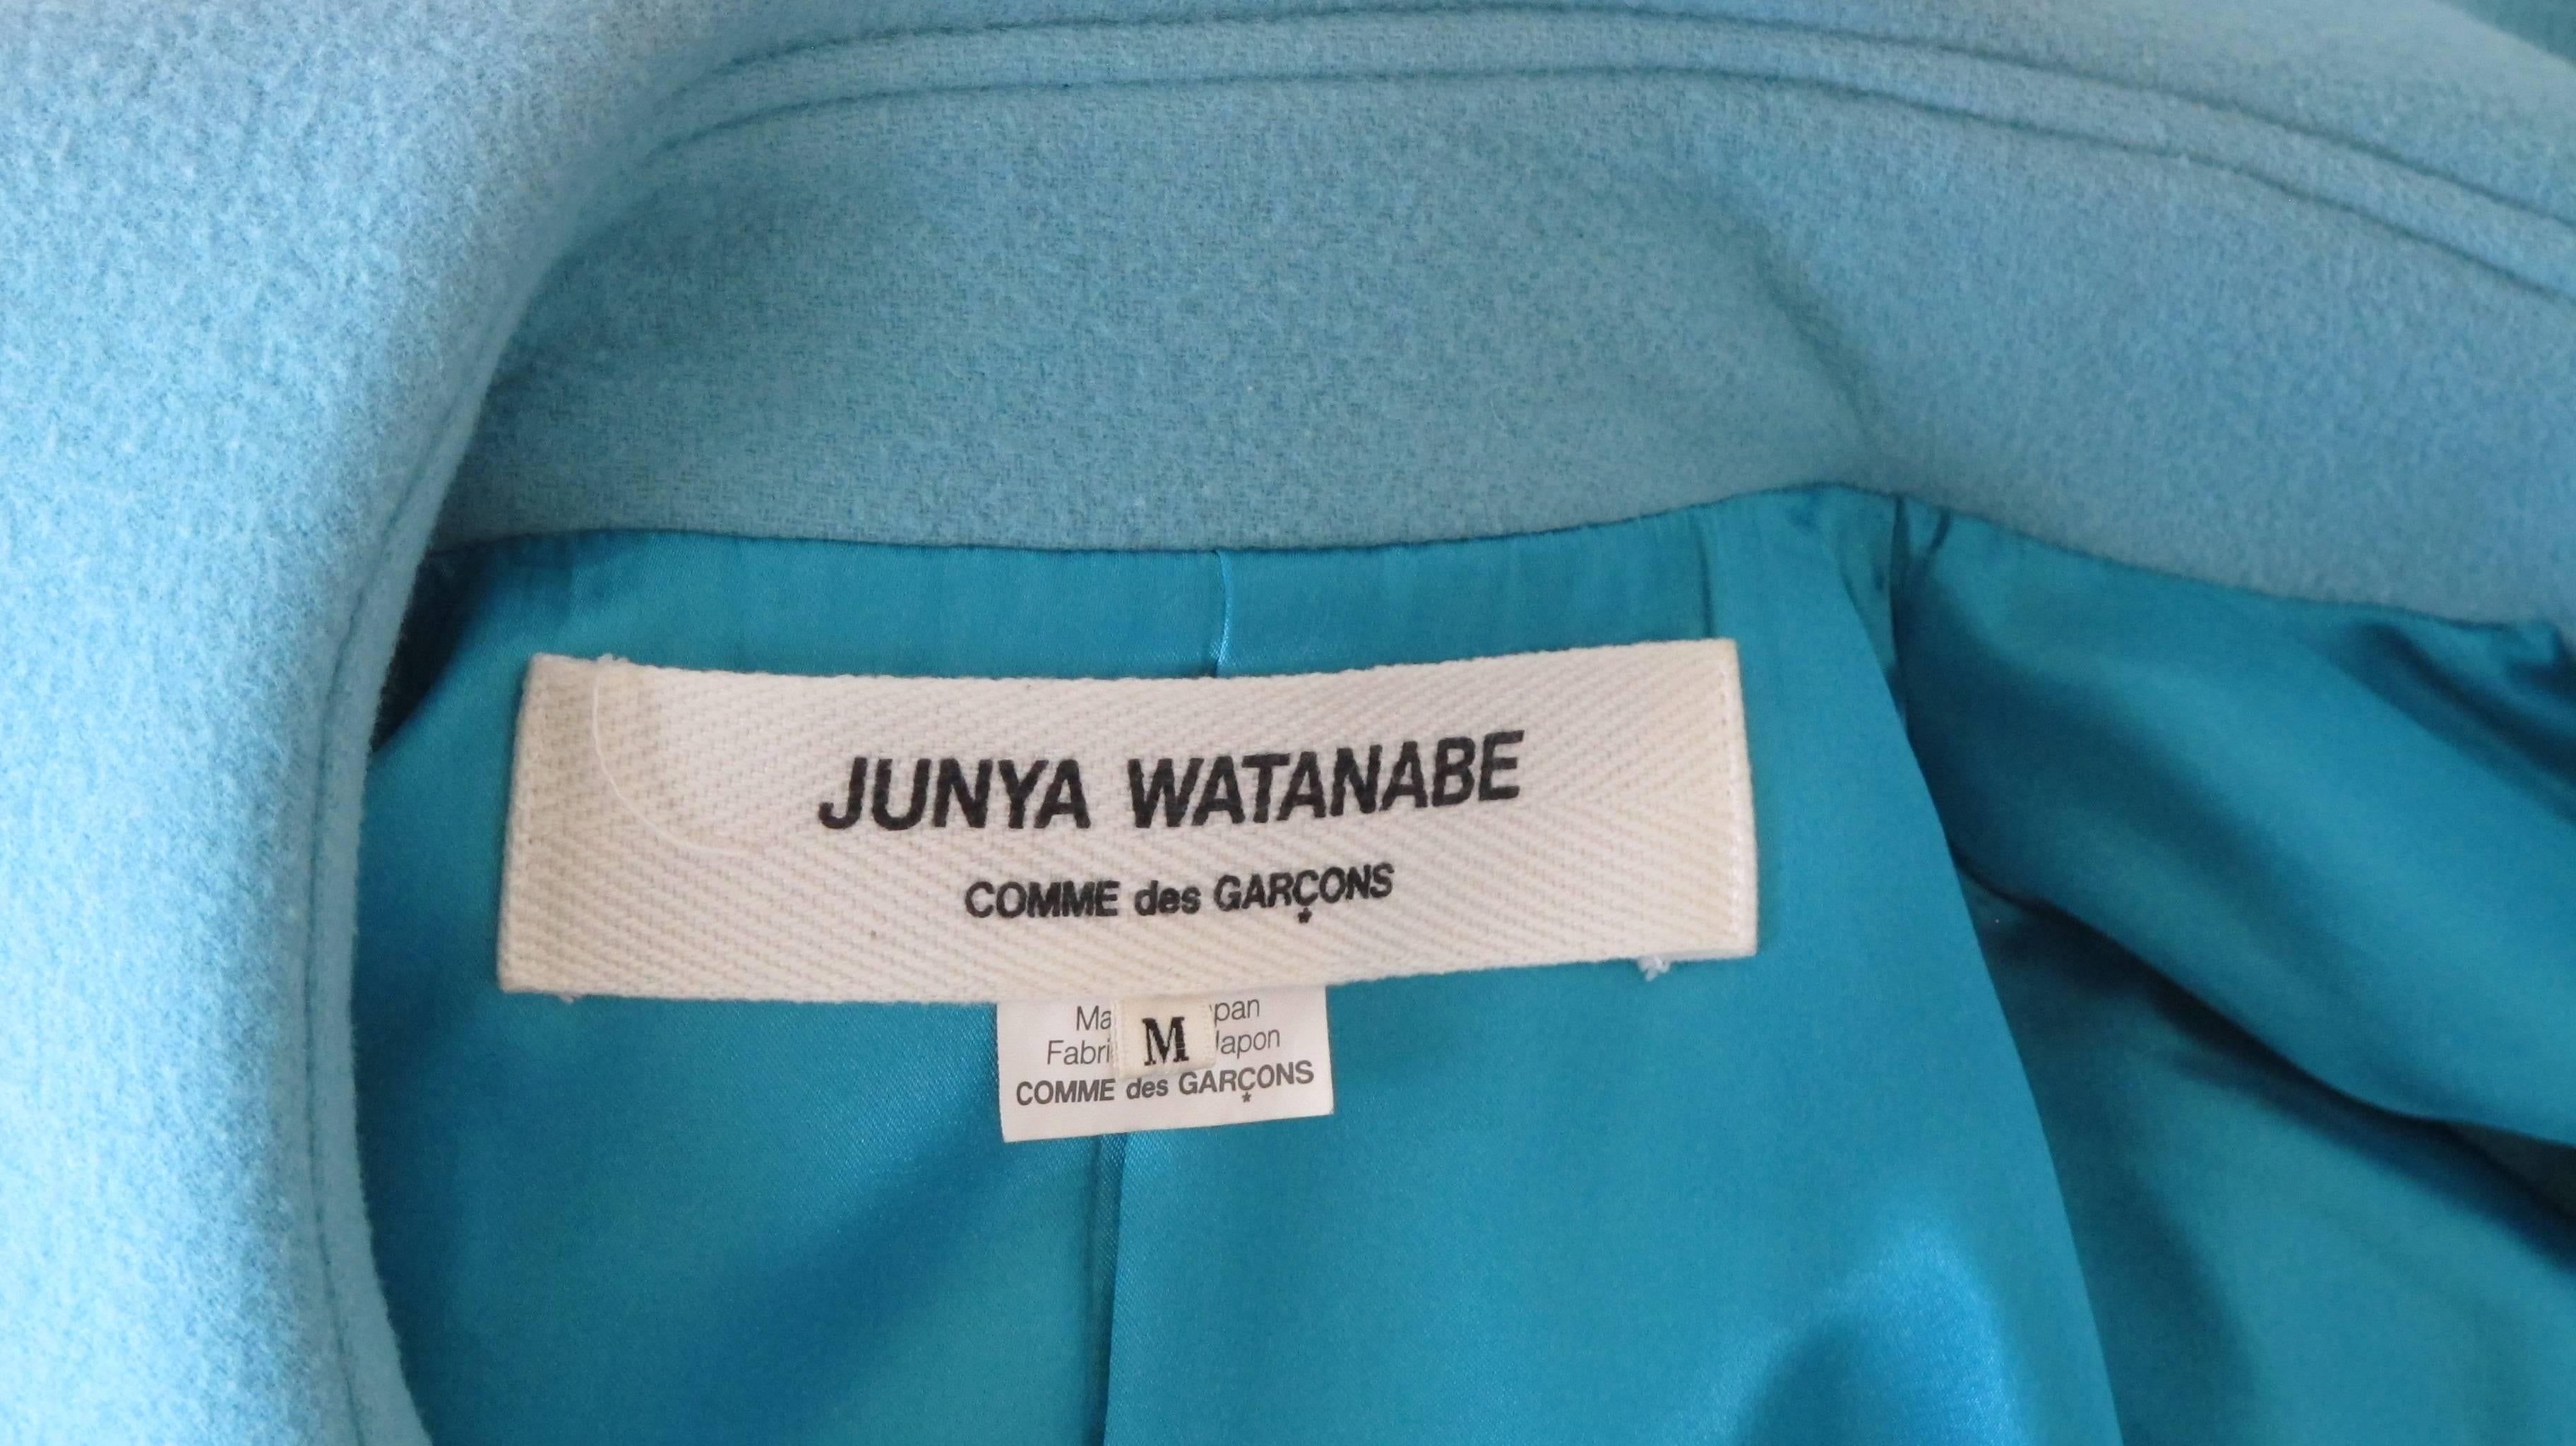 A 2001 powder blue Junya Watanabe for Comme des Garcons melton wool swing coat with oversized Peter Pan collar and oversized white button closures down the front. Fully lined. Size M. In very good condition with some very hard to see color fading of